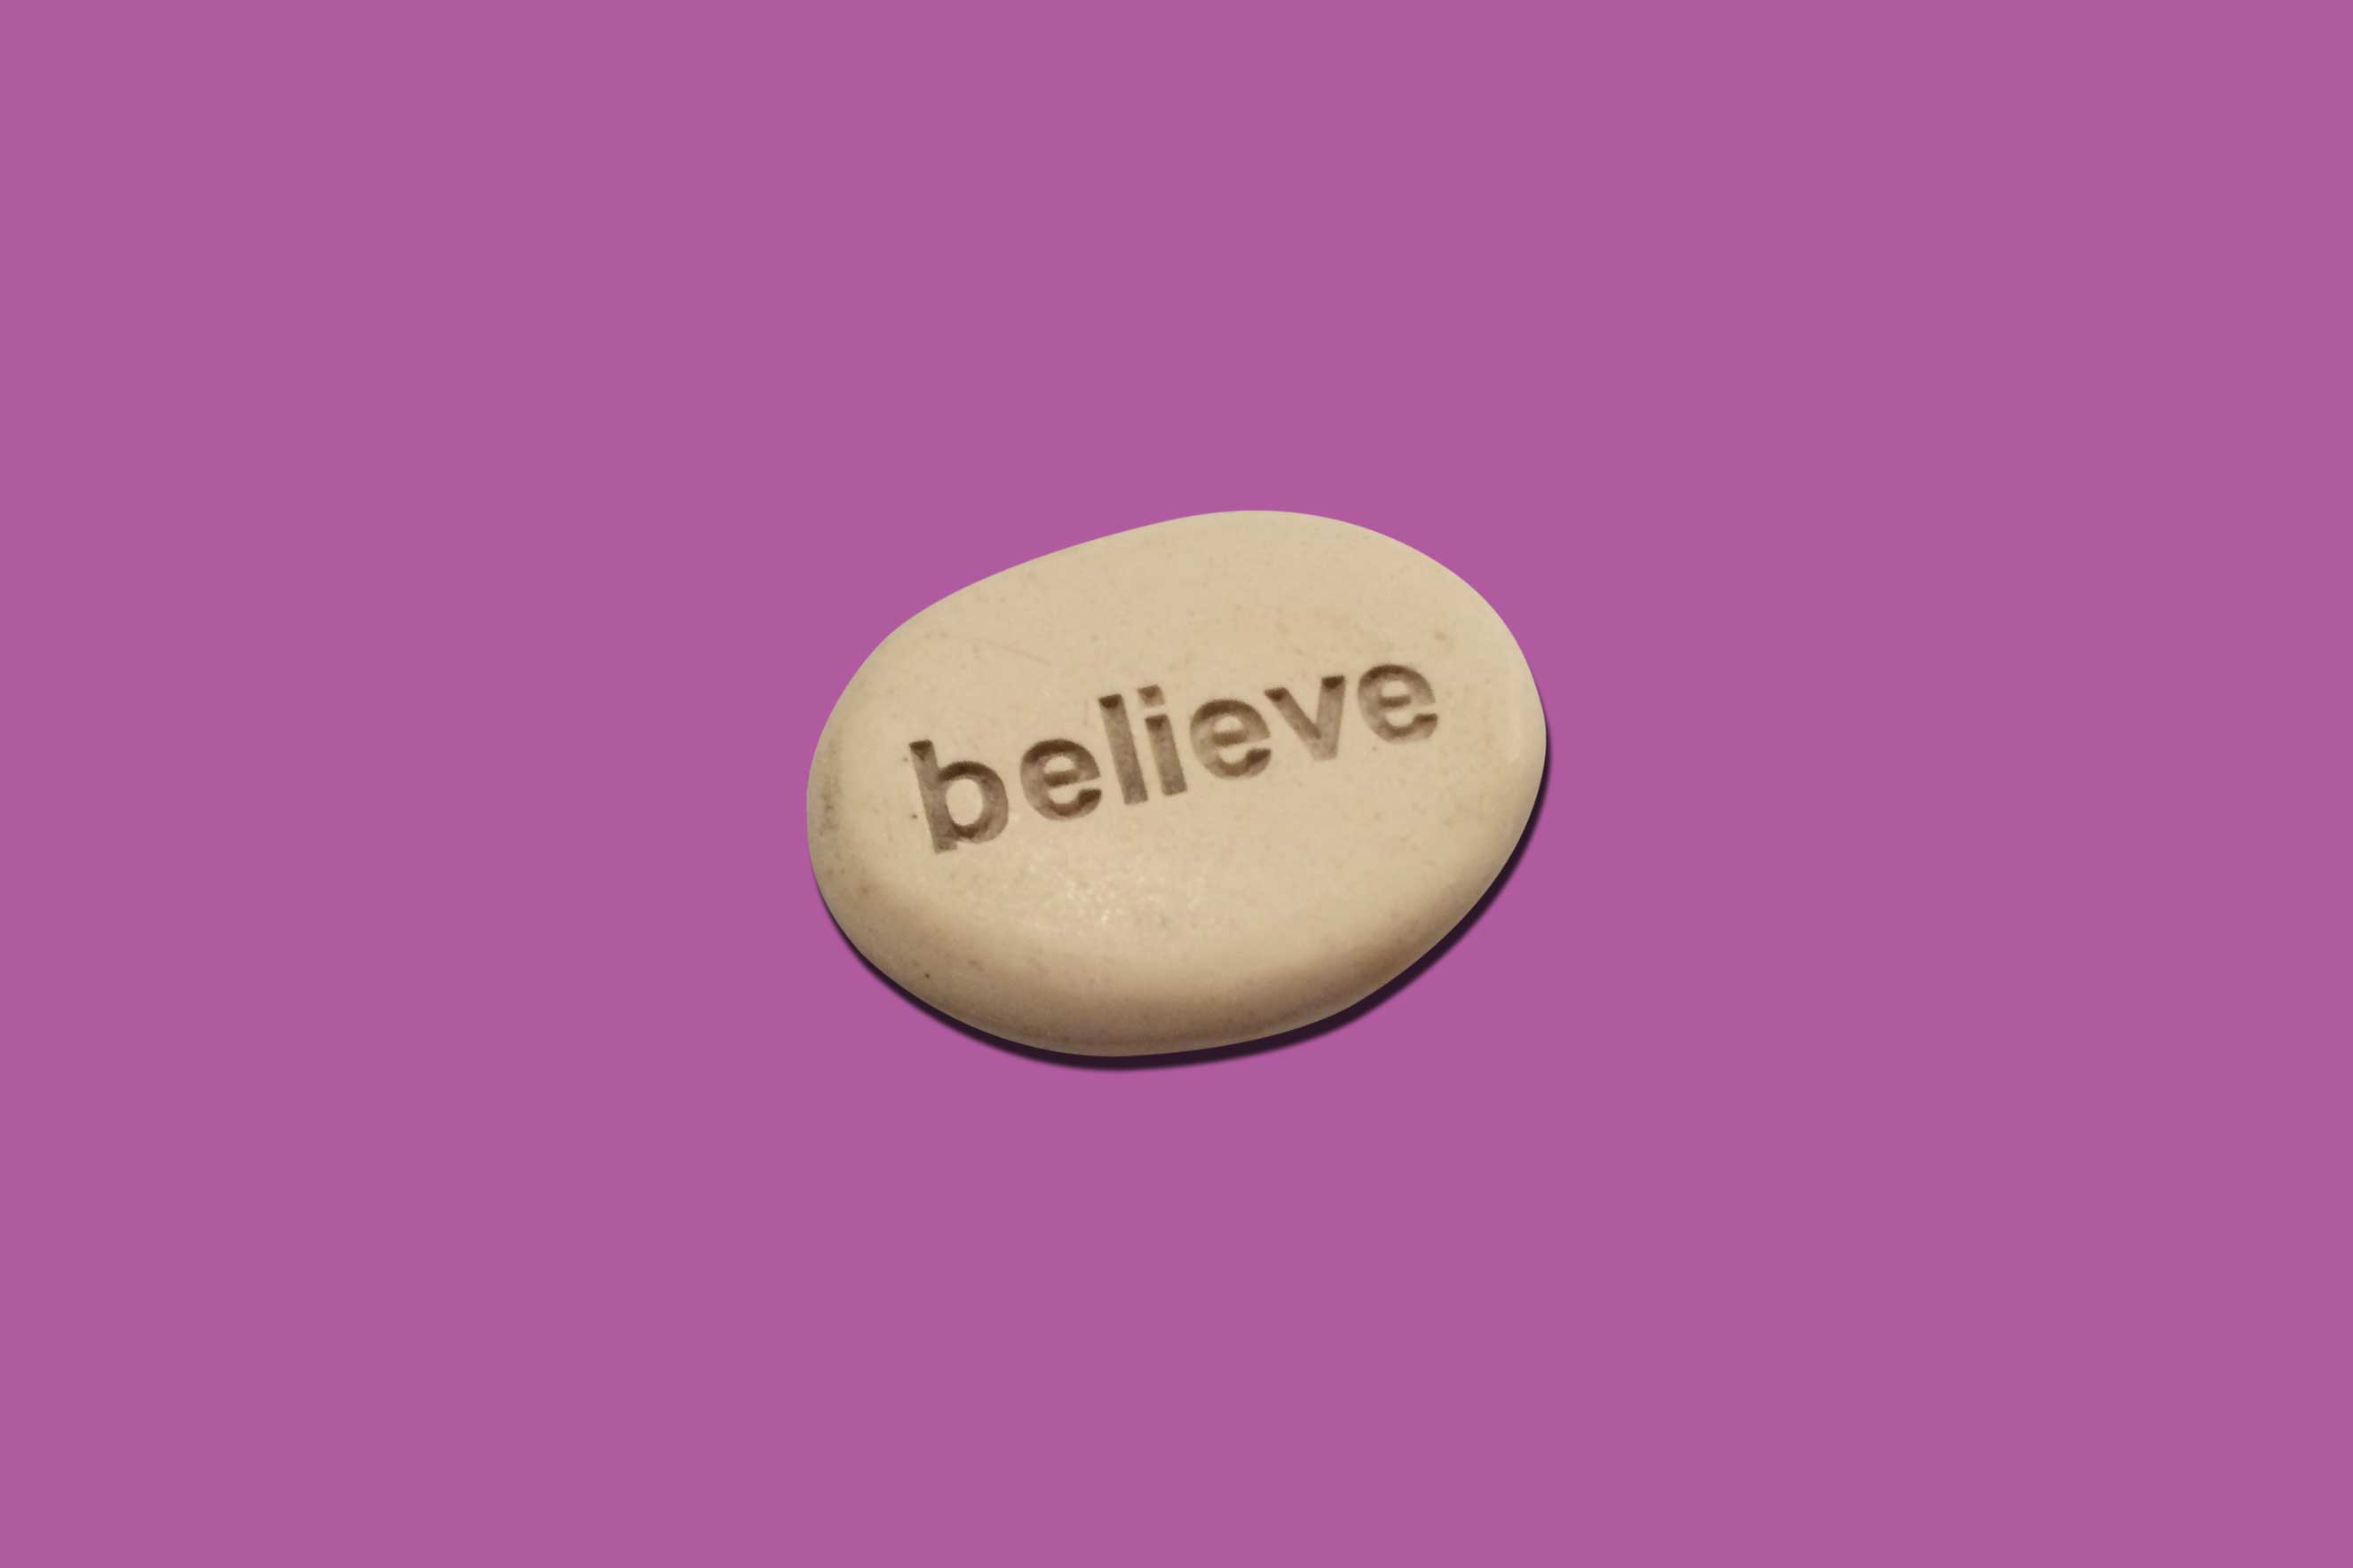 6.  Nikki Haley’s
                              ‘Believe’ Stone: 
                              “I look at it every morning,” says the South Carolina governor. “It reminds me to believe in myself and to believe in the goodness of people.